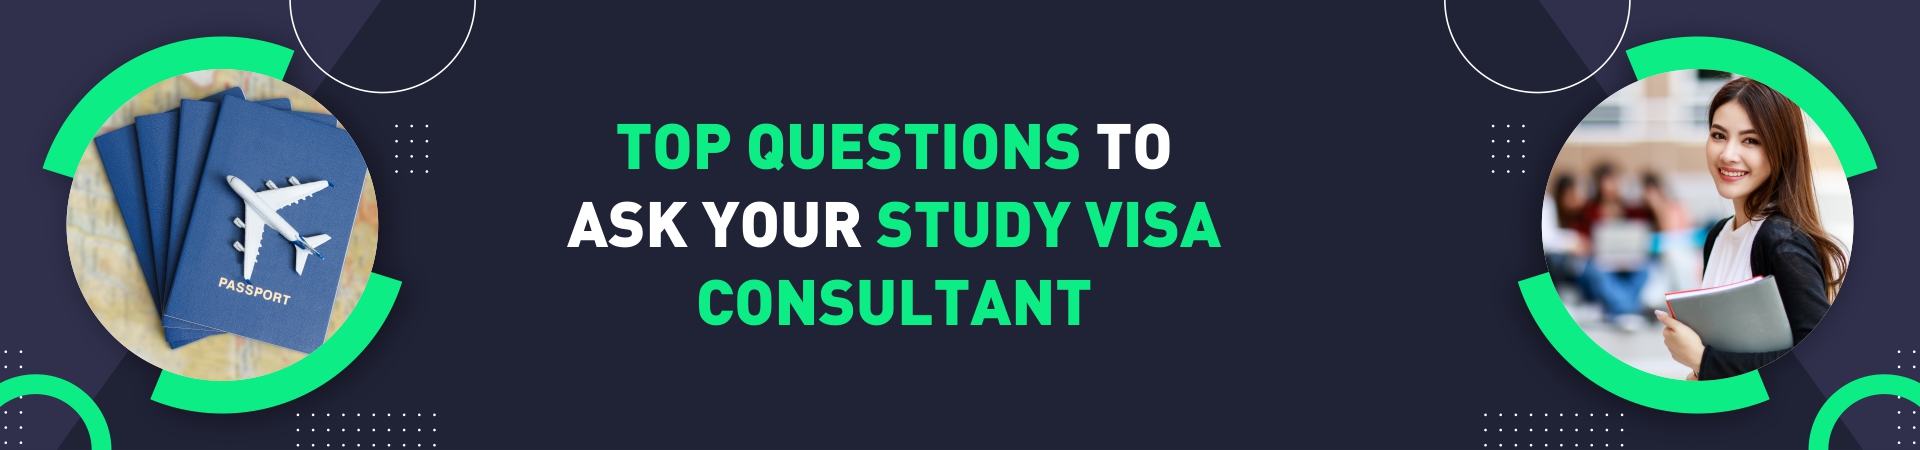 Top Questions to Ask Your Study Visa Consultant